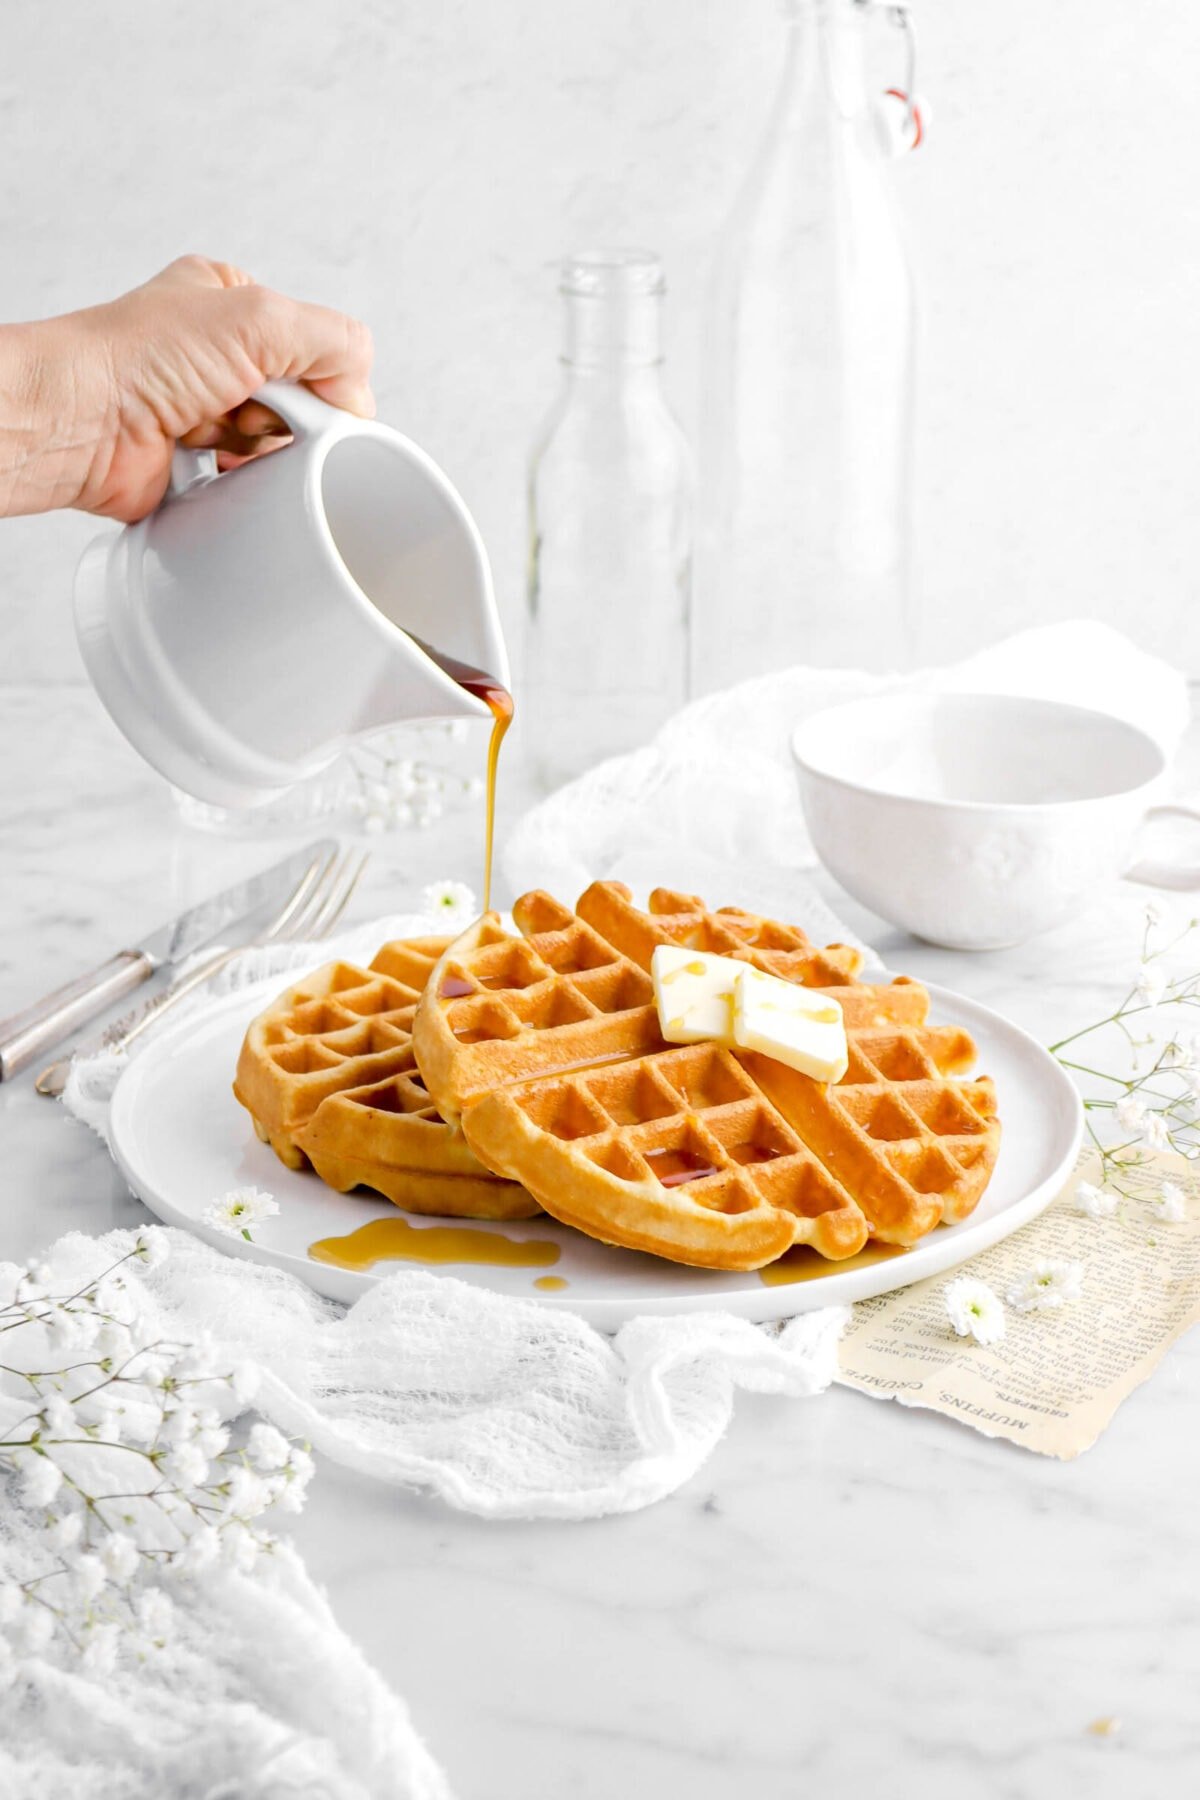 two waffles on large white plate with two pads of butter on one waffle with maple syrup being poured onto waffle, with white cheesecloth and white flowers around.